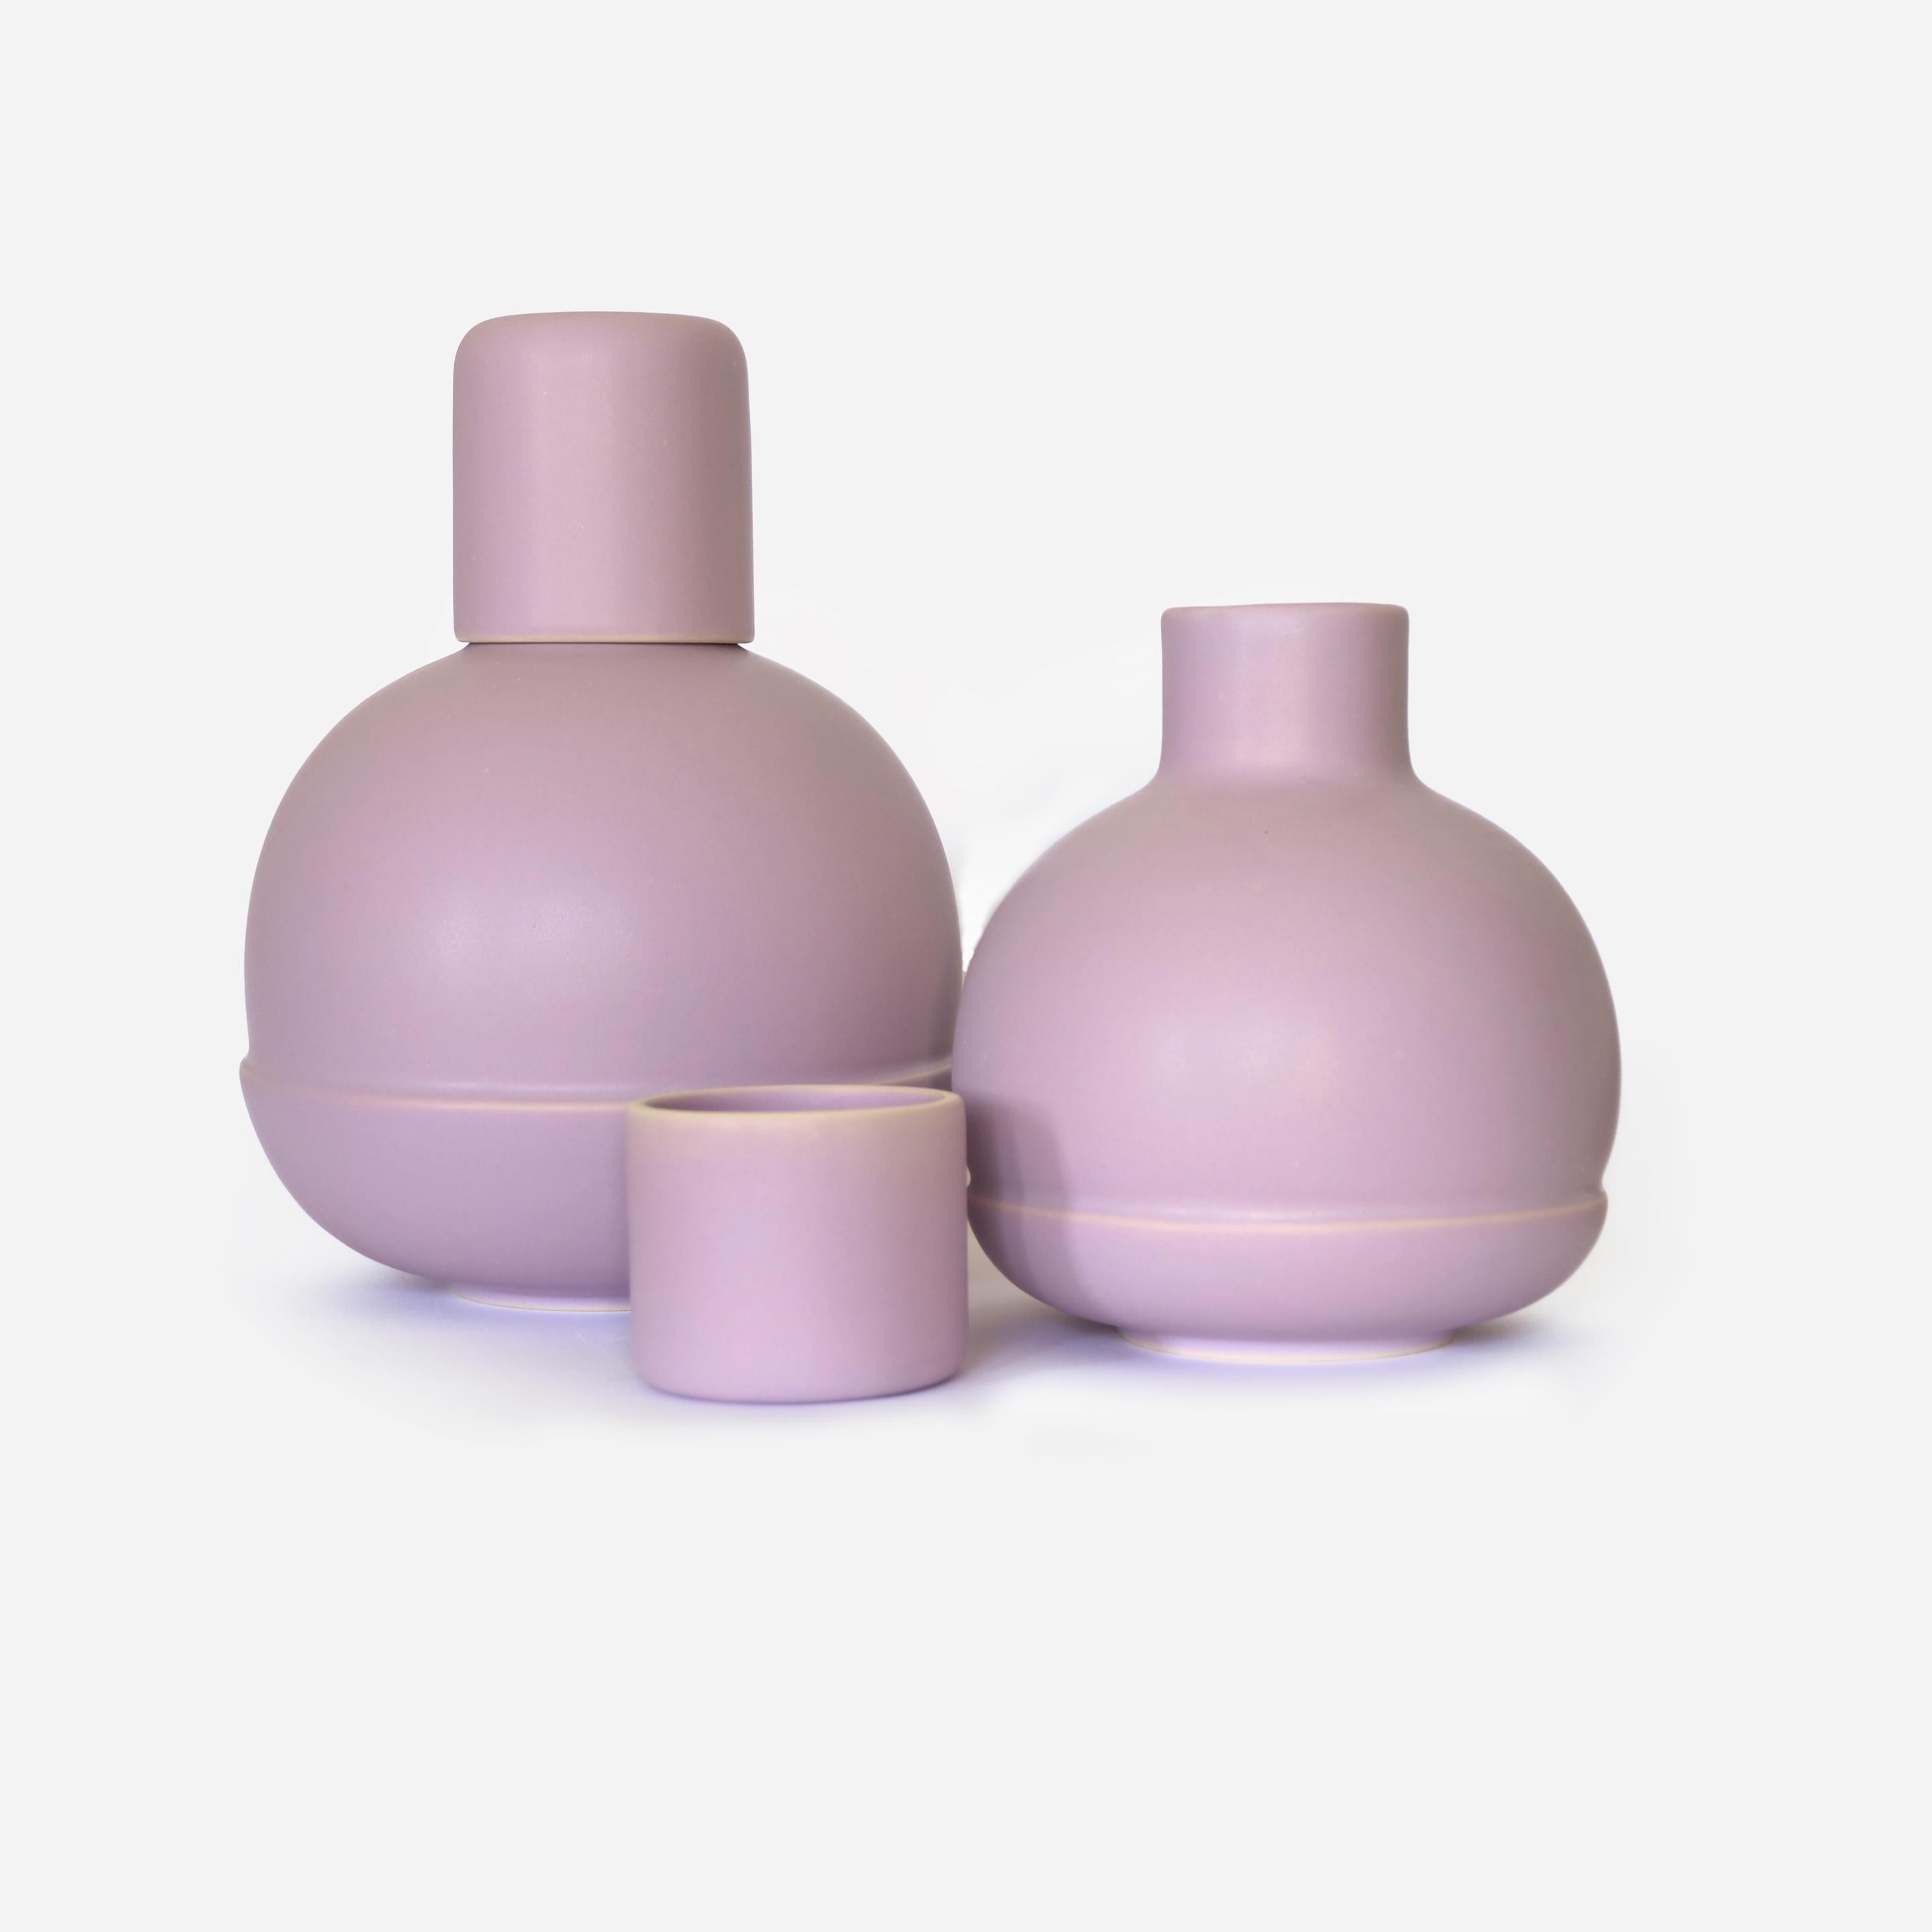 Glazed Lavanda Carafe and cups Large, Handmade Inspired by Traditional Ceramic Carafes  For Sale